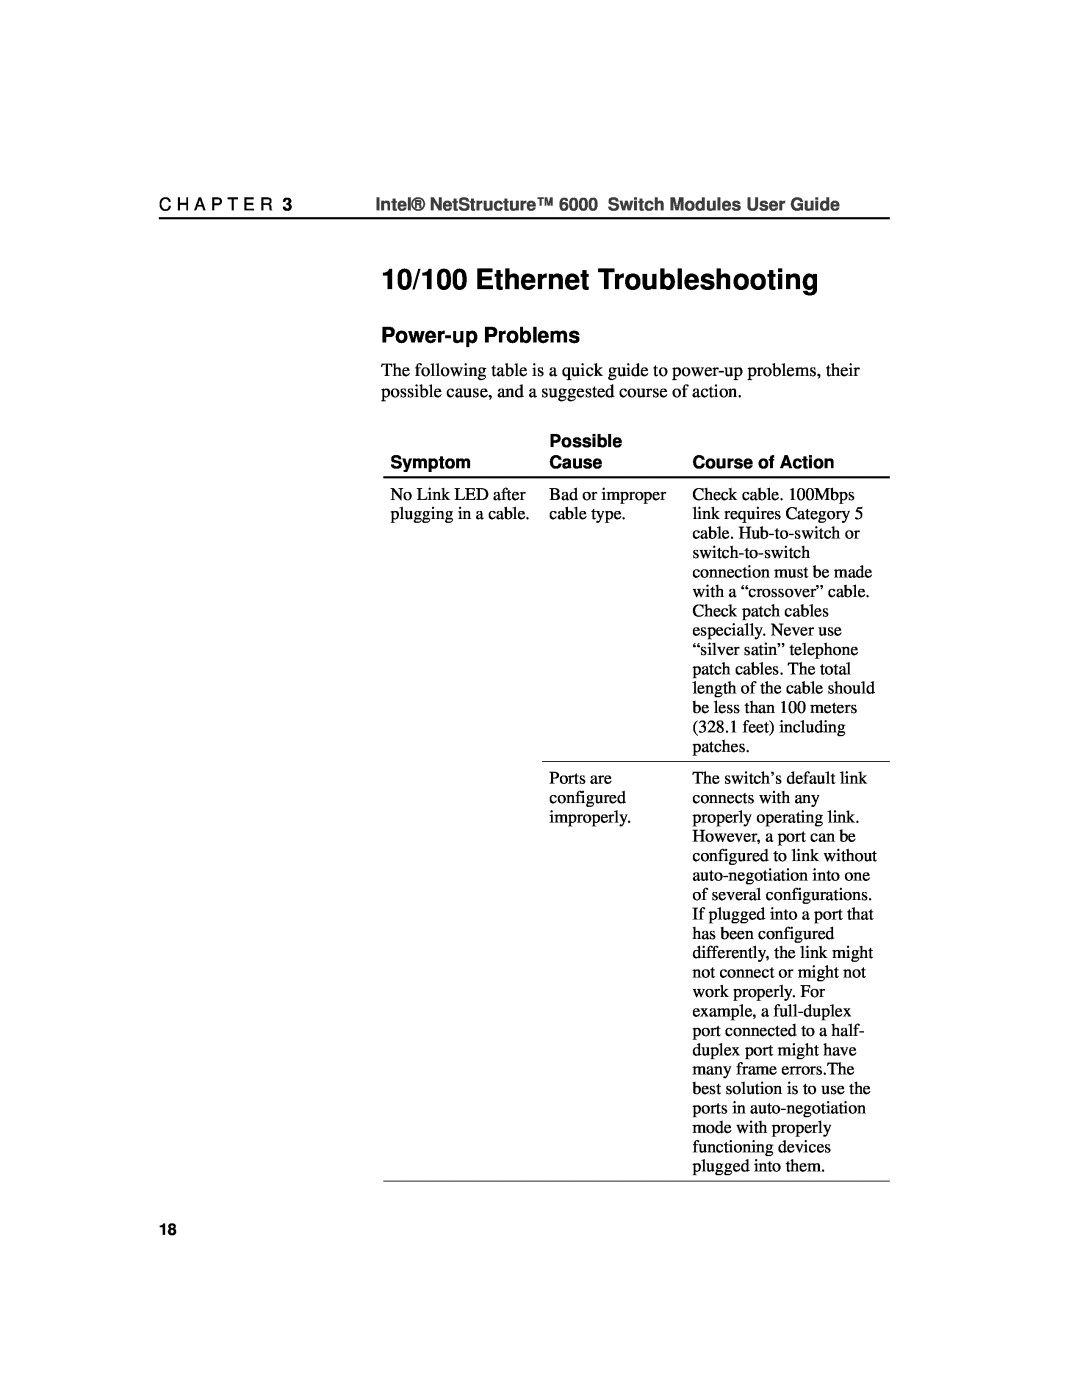 Intel A21721-001 10/100 Ethernet Troubleshooting, Power-up Problems, Intel NetStructure 6000 Switch Modules User Guide 